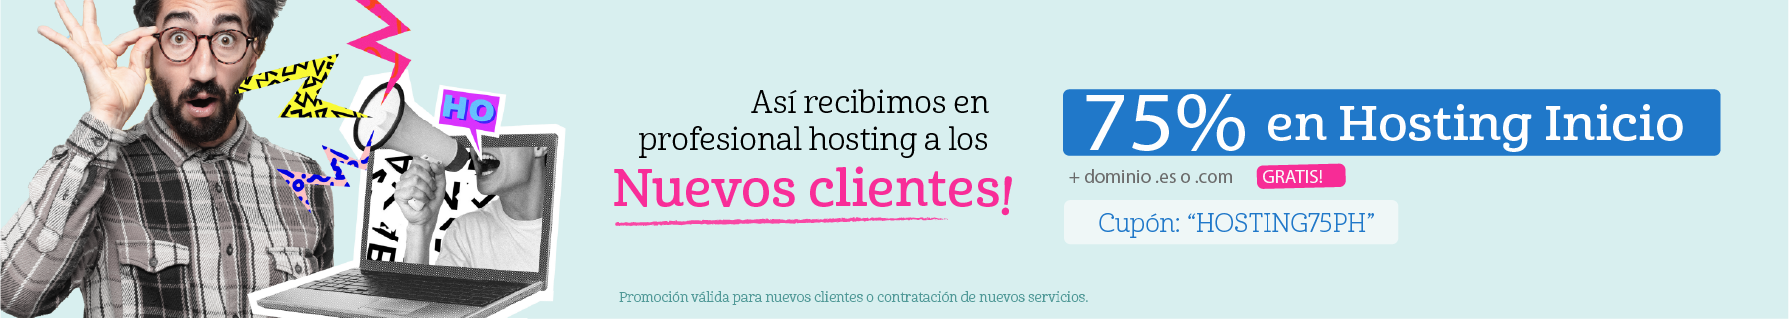 cupon profesional hosting descuento 75%